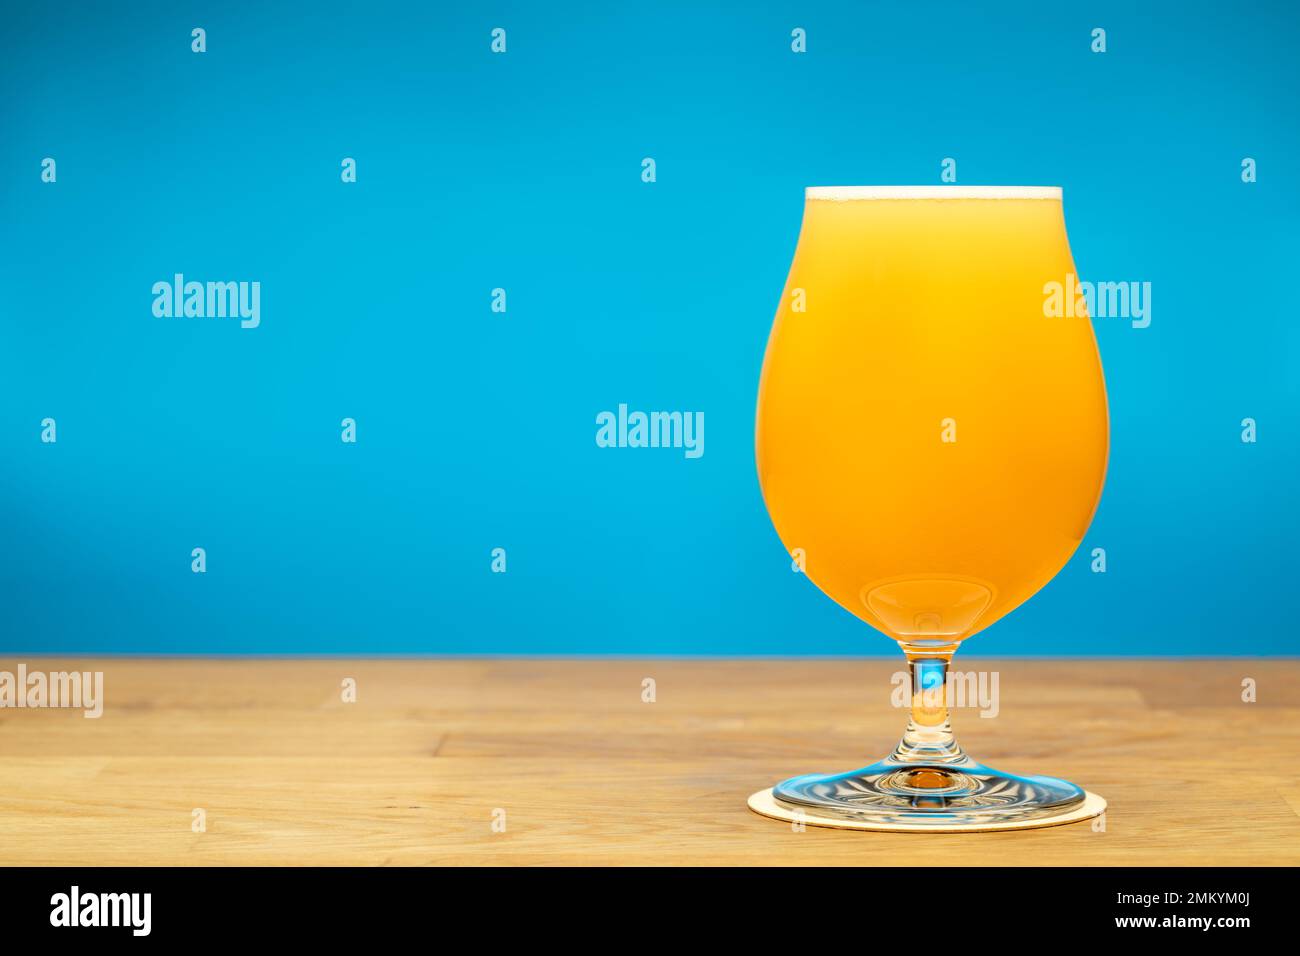 Full snifter glass of hazy New England IPA (NEIPA) pale ale beer on wooden table with blue background Stock Photo